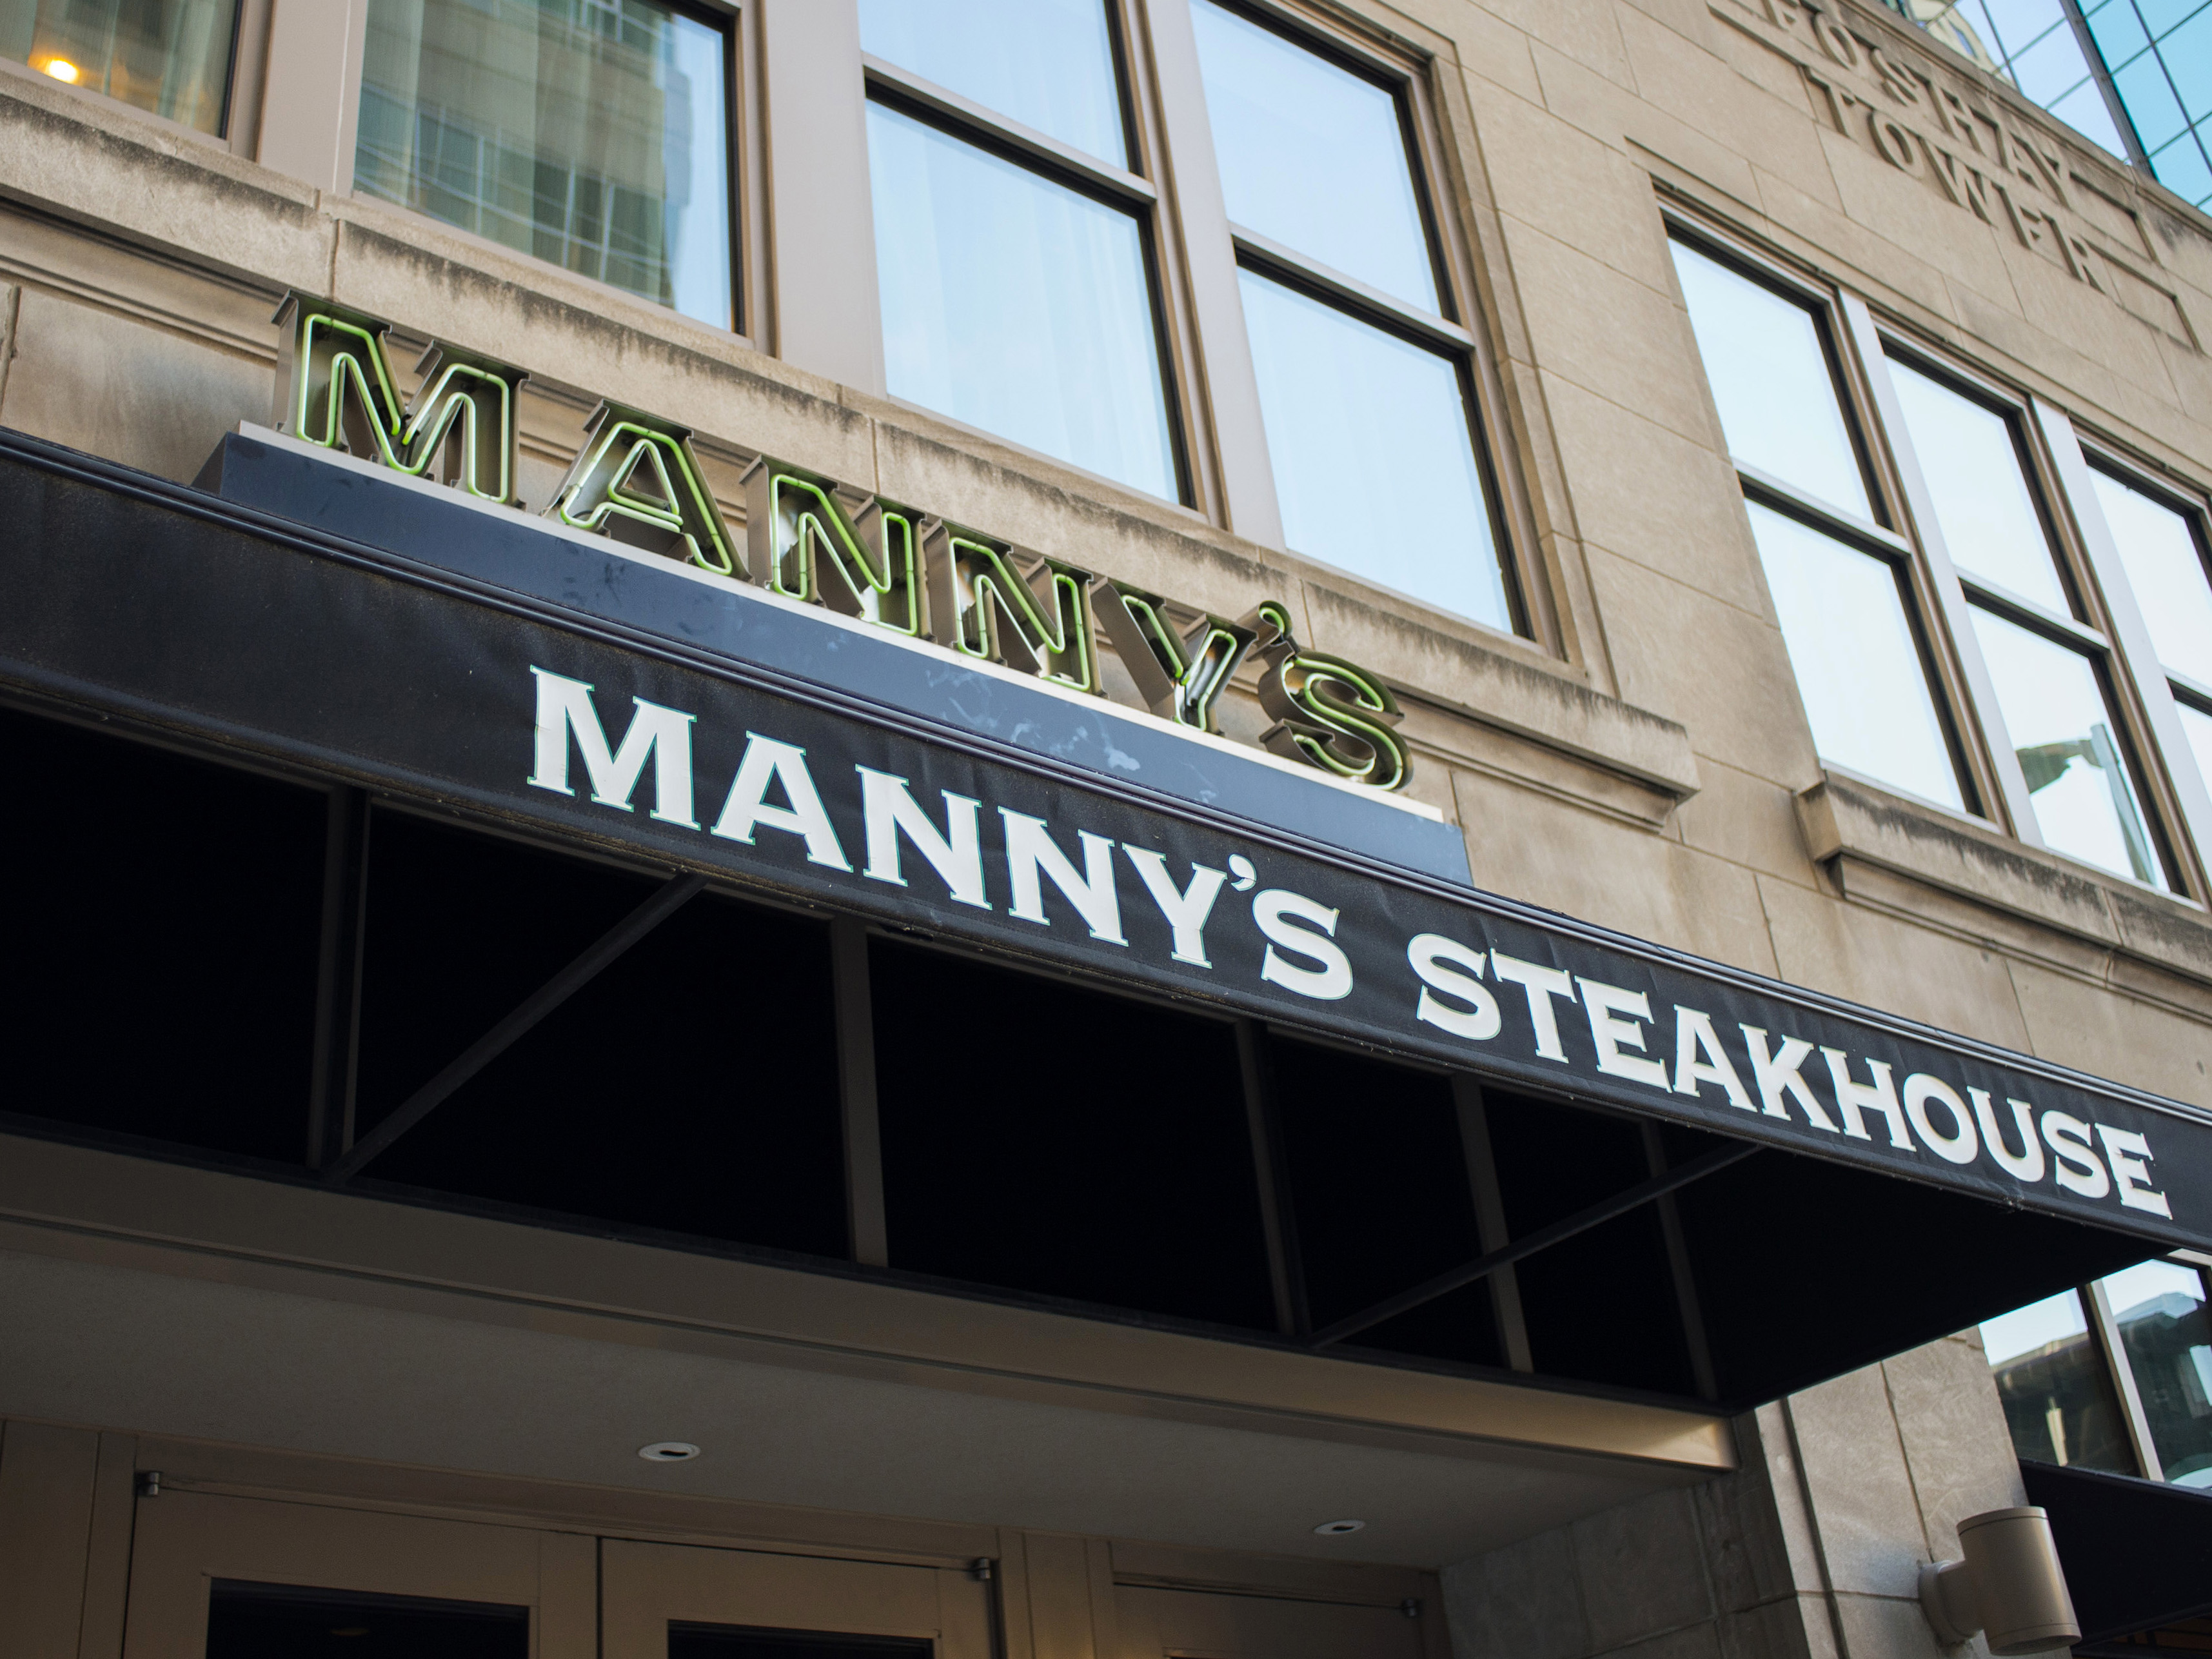 View of front awning of Manny's Steakhouse